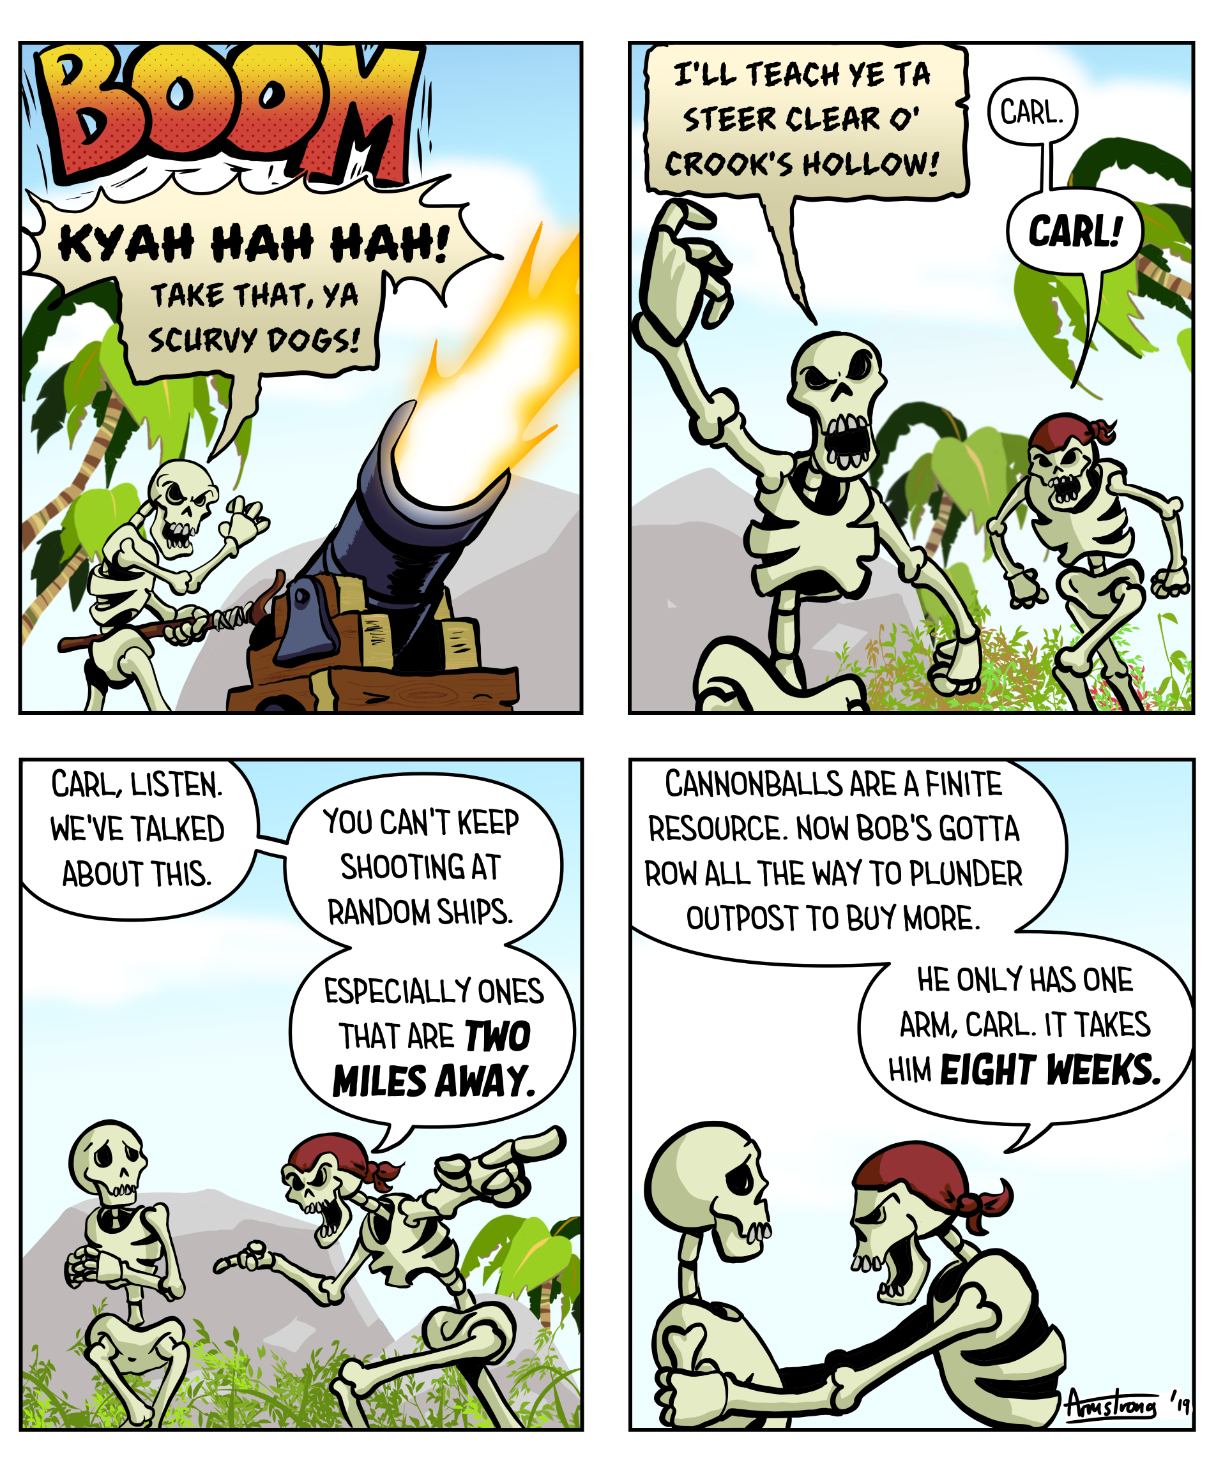 A comic strip featuring Skeletons from the video game Sea of Thieves